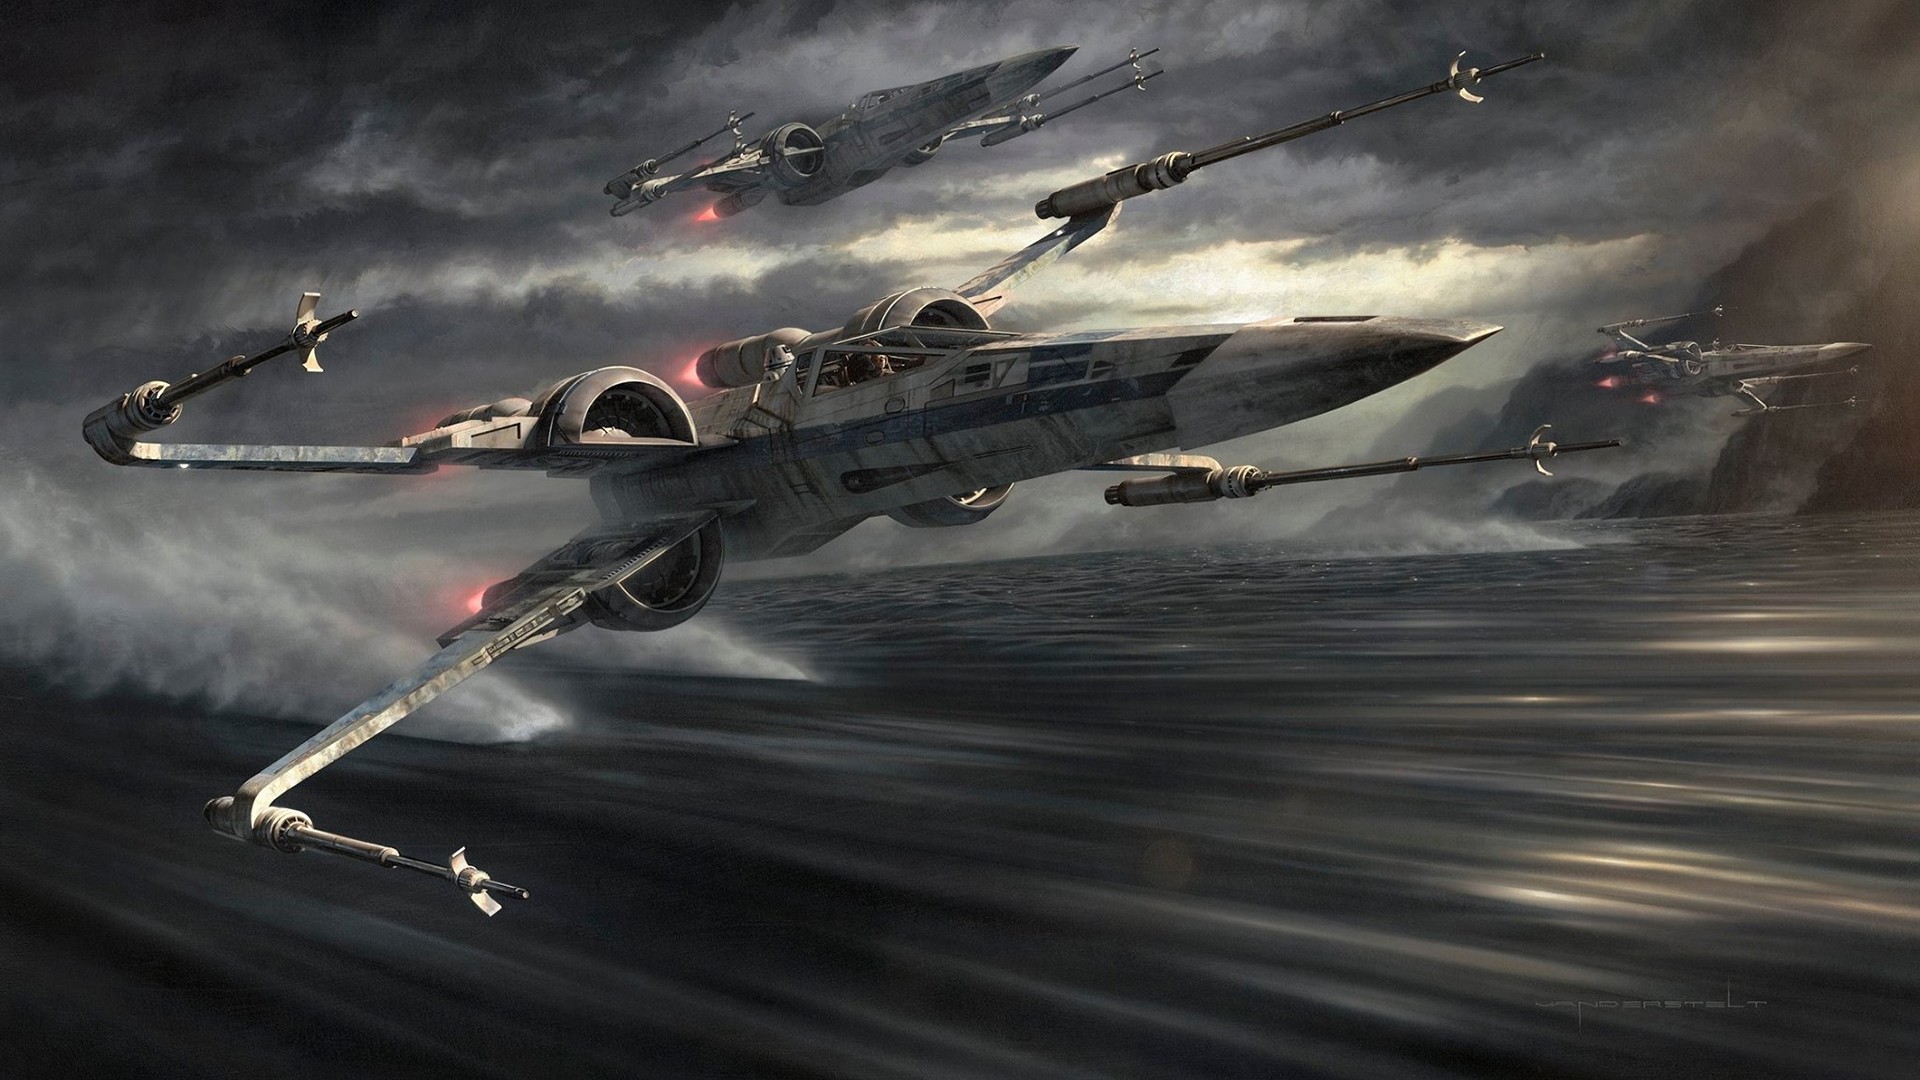 1920x1080 Star Wars: The Force Awakens inspired lithograph print, "Incom Tearin' It  Up" by Jerry Vanderstelt featuring the X-Wing fighter in action!